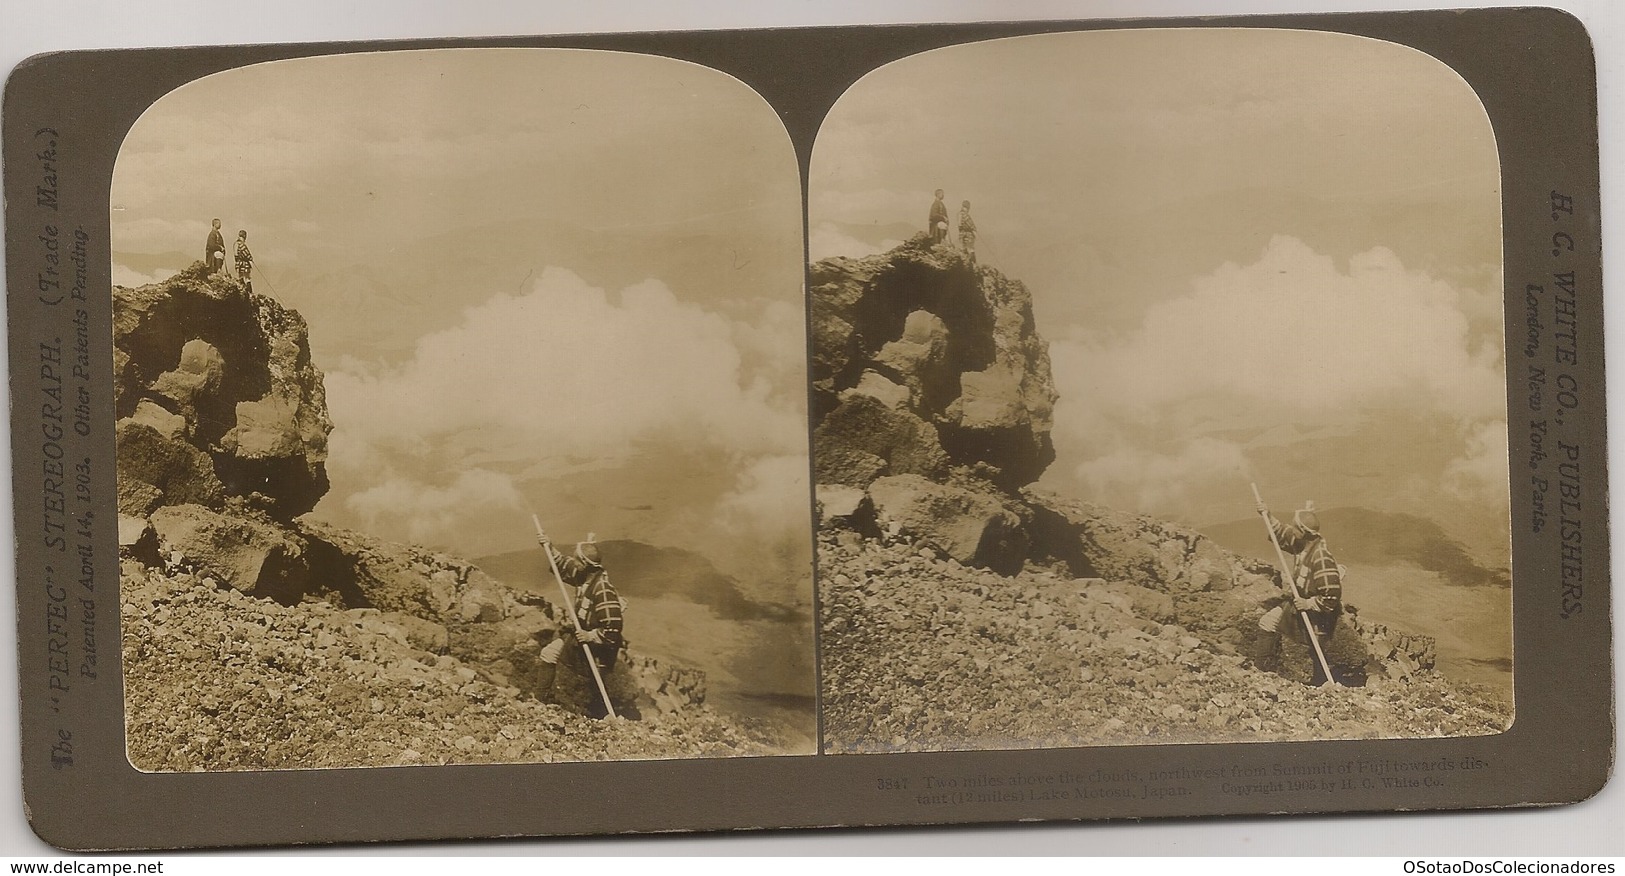 STEREO Japan - Stereoscopic Lake Motosu - Two Miles Above The Clouds, Northwest From Summit Of Fuji - H. C. WHITE CO - Stereoscoopen